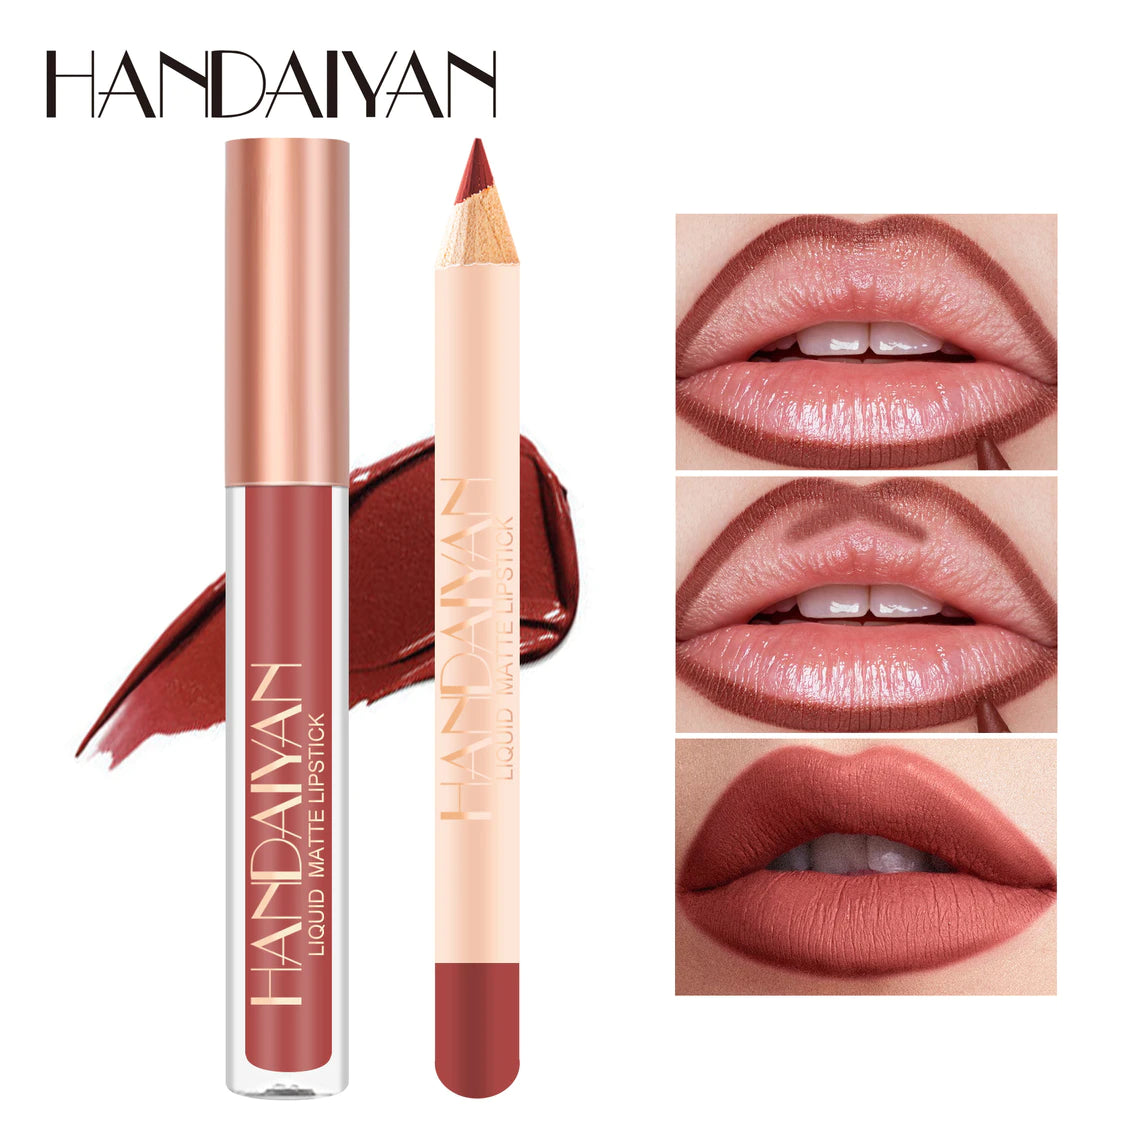 Dwaterproof Waterproof Matte Lip Liner Red Contour Shades Long Lasting Lipstick Nude Brown Cup Lip Gloss Lips Makeup Cosmetics